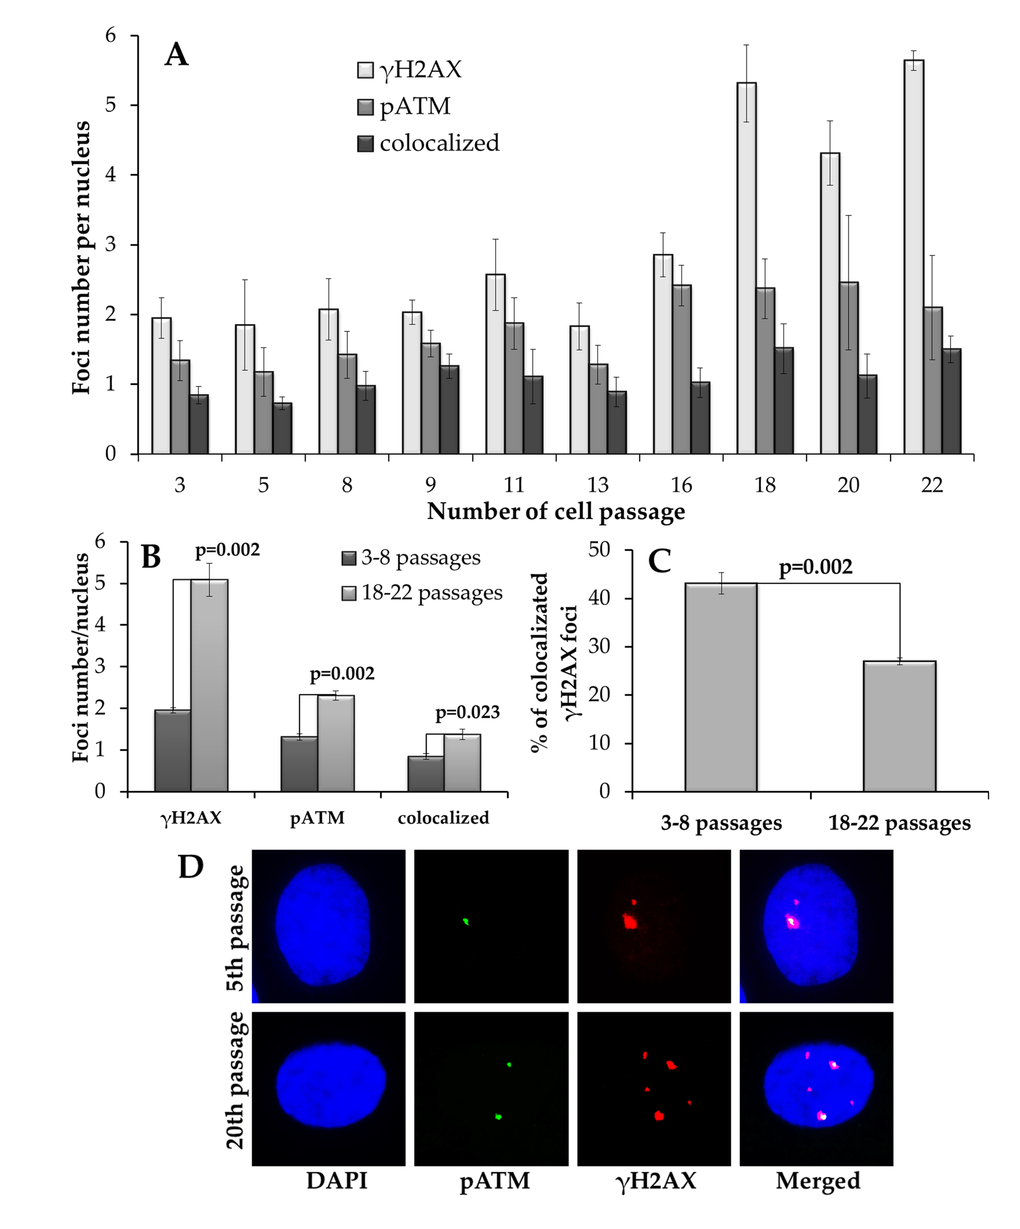 Immunocytochemical analysis of γH2AX and pATM foci. (A) Changes in γH2AX, pATM foci and their co-localization depending on the passage number in MSCs. (B) Comparative analysis of γH2AX, pATM foci and their co-localization in early (3-8) vs. late (18-22) passages of MSCs. (C) Fraction of γH2AX foci that co-localize with pATM at early (3-8) vs. late (18-22) passages of MSCs. (D) Representative immunofluorescent microphotographs of MSC showing γH2AX (green), pATM (red) foci and their co-localization (yellow) at passage 5 and 20. Nuclei were counterstained with DAPI.